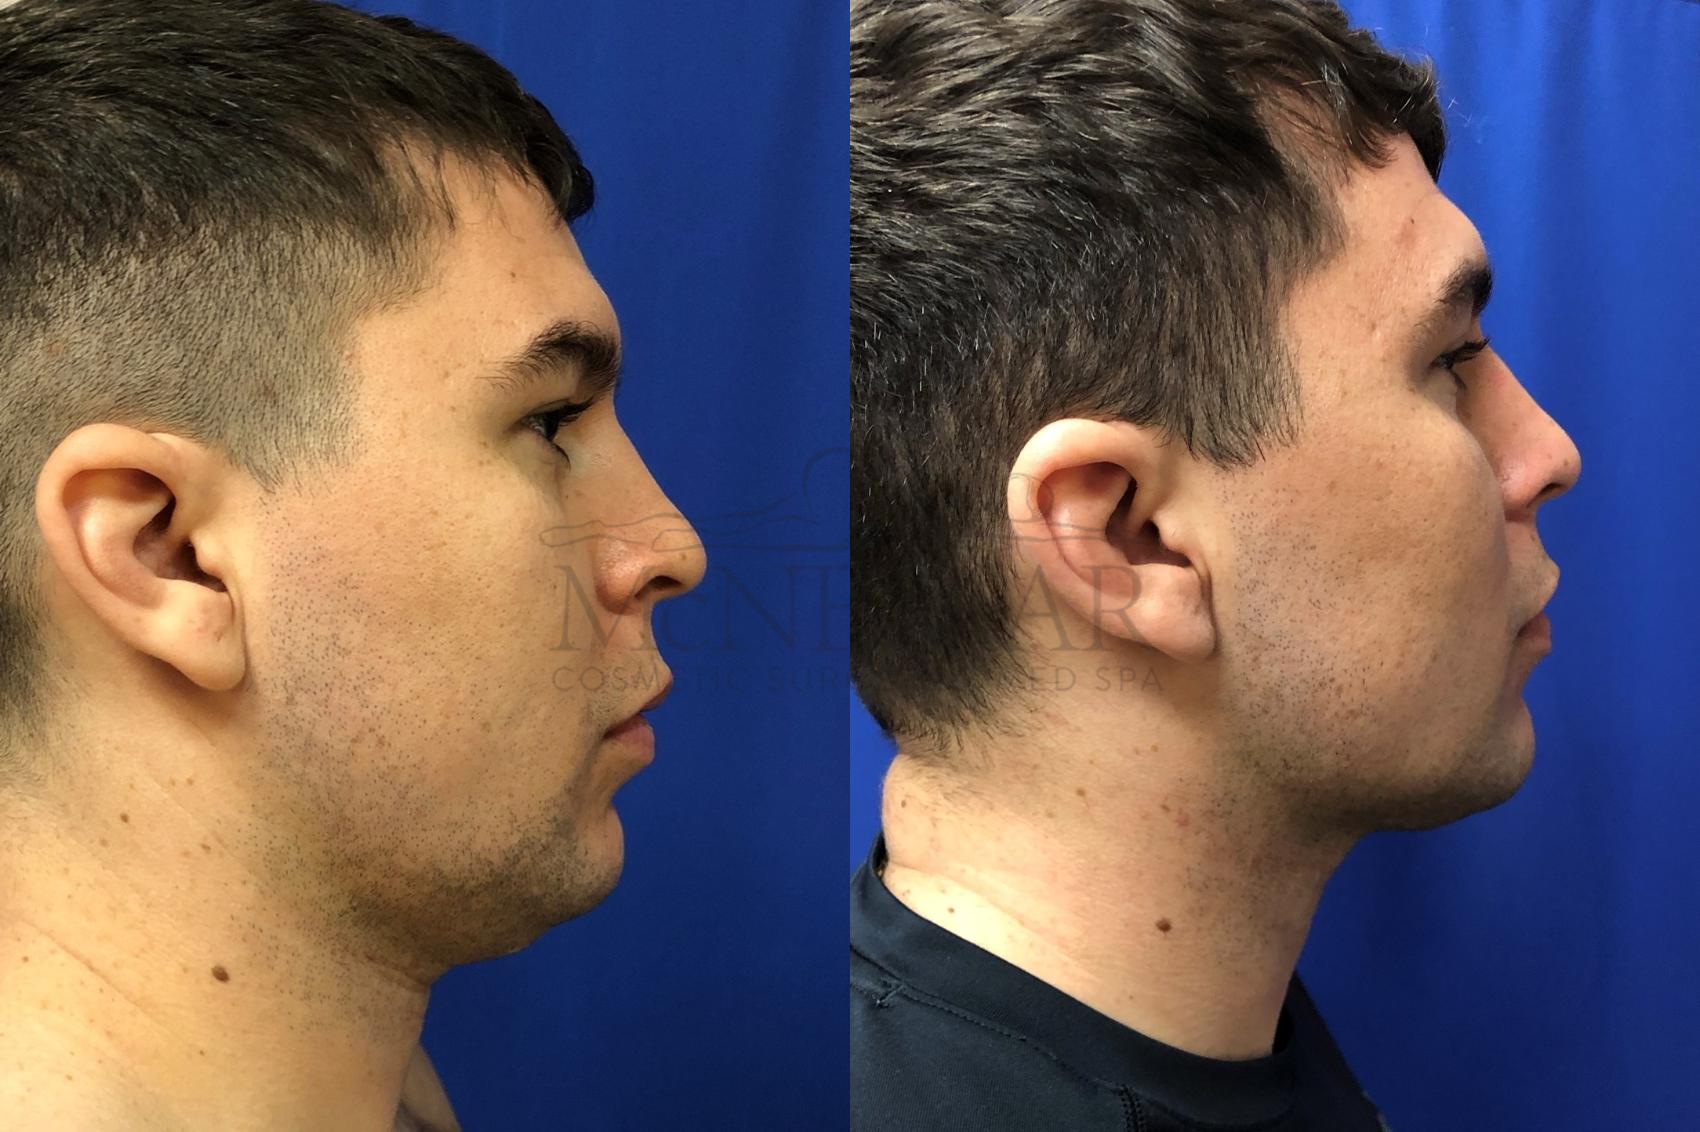 Liposuction for a 30 year old male. 